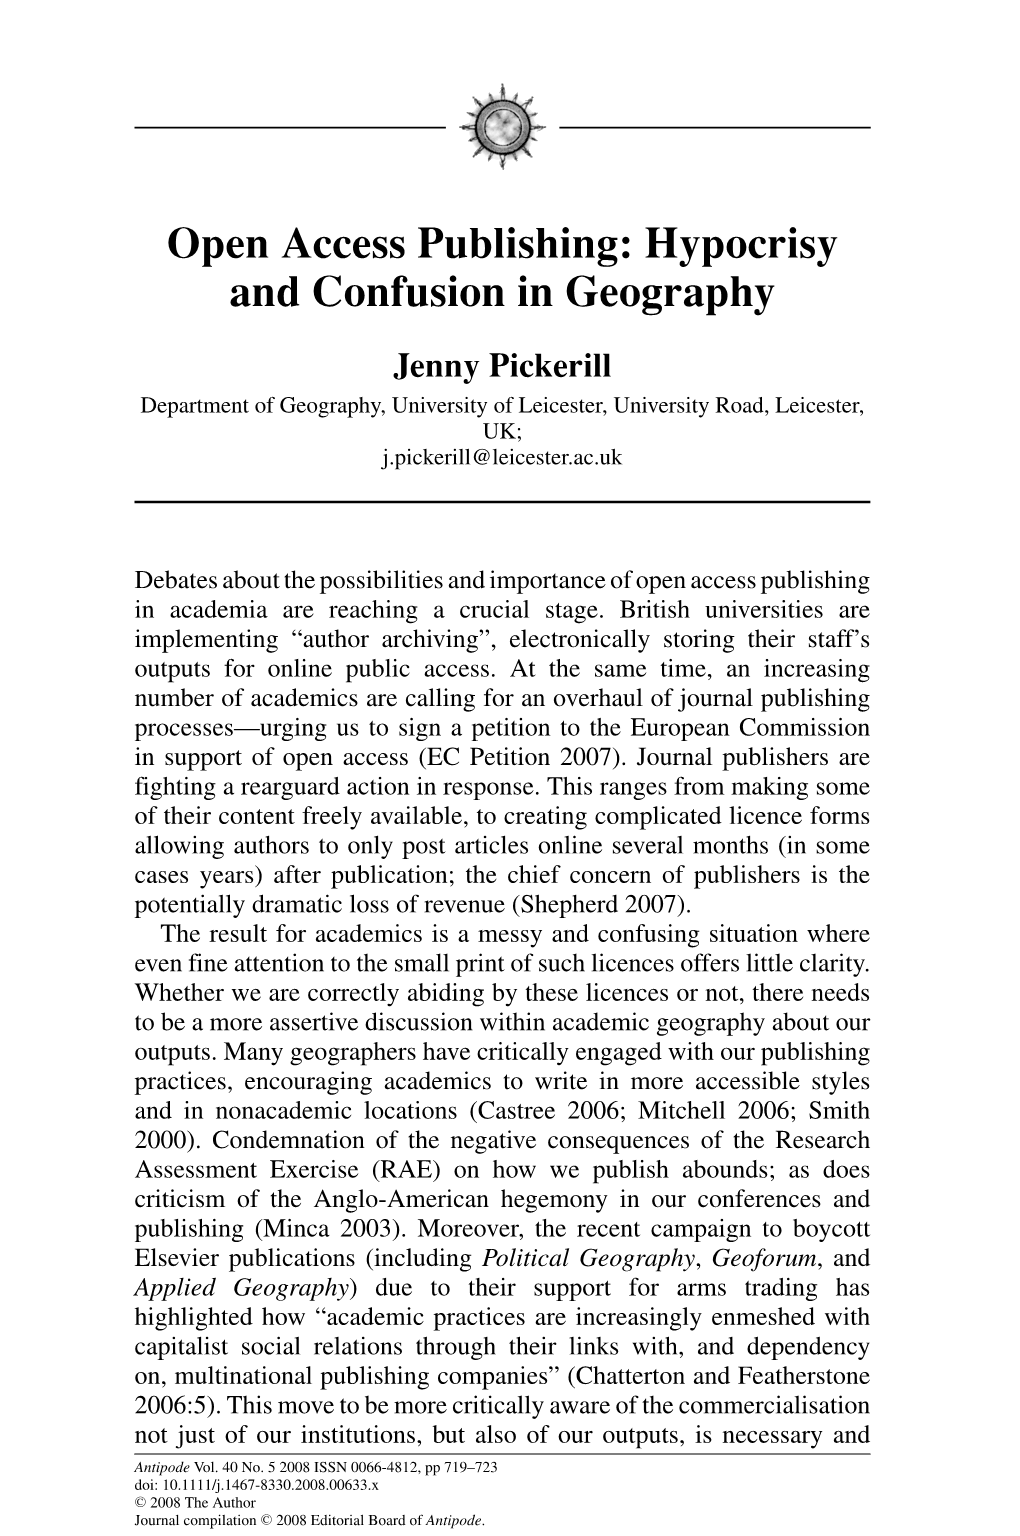 Open Access Publishing: Hypocrisy and Confusion in Geography